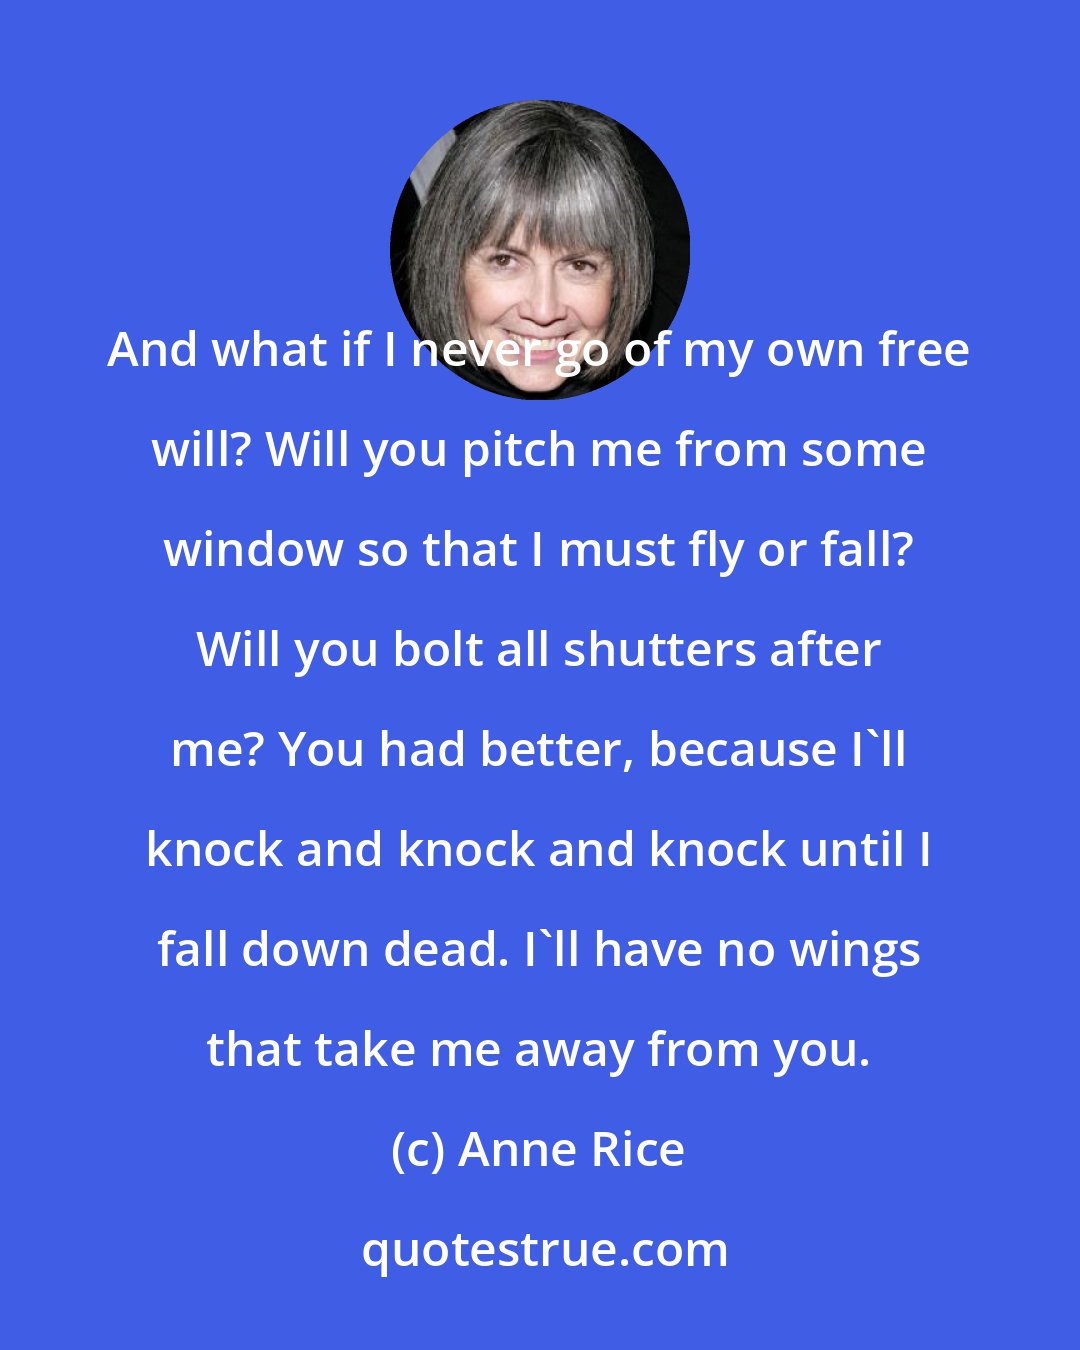 Anne Rice: And what if I never go of my own free will? Will you pitch me from some window so that I must fly or fall? Will you bolt all shutters after me? You had better, because I'll knock and knock and knock until I fall down dead. I'll have no wings that take me away from you.